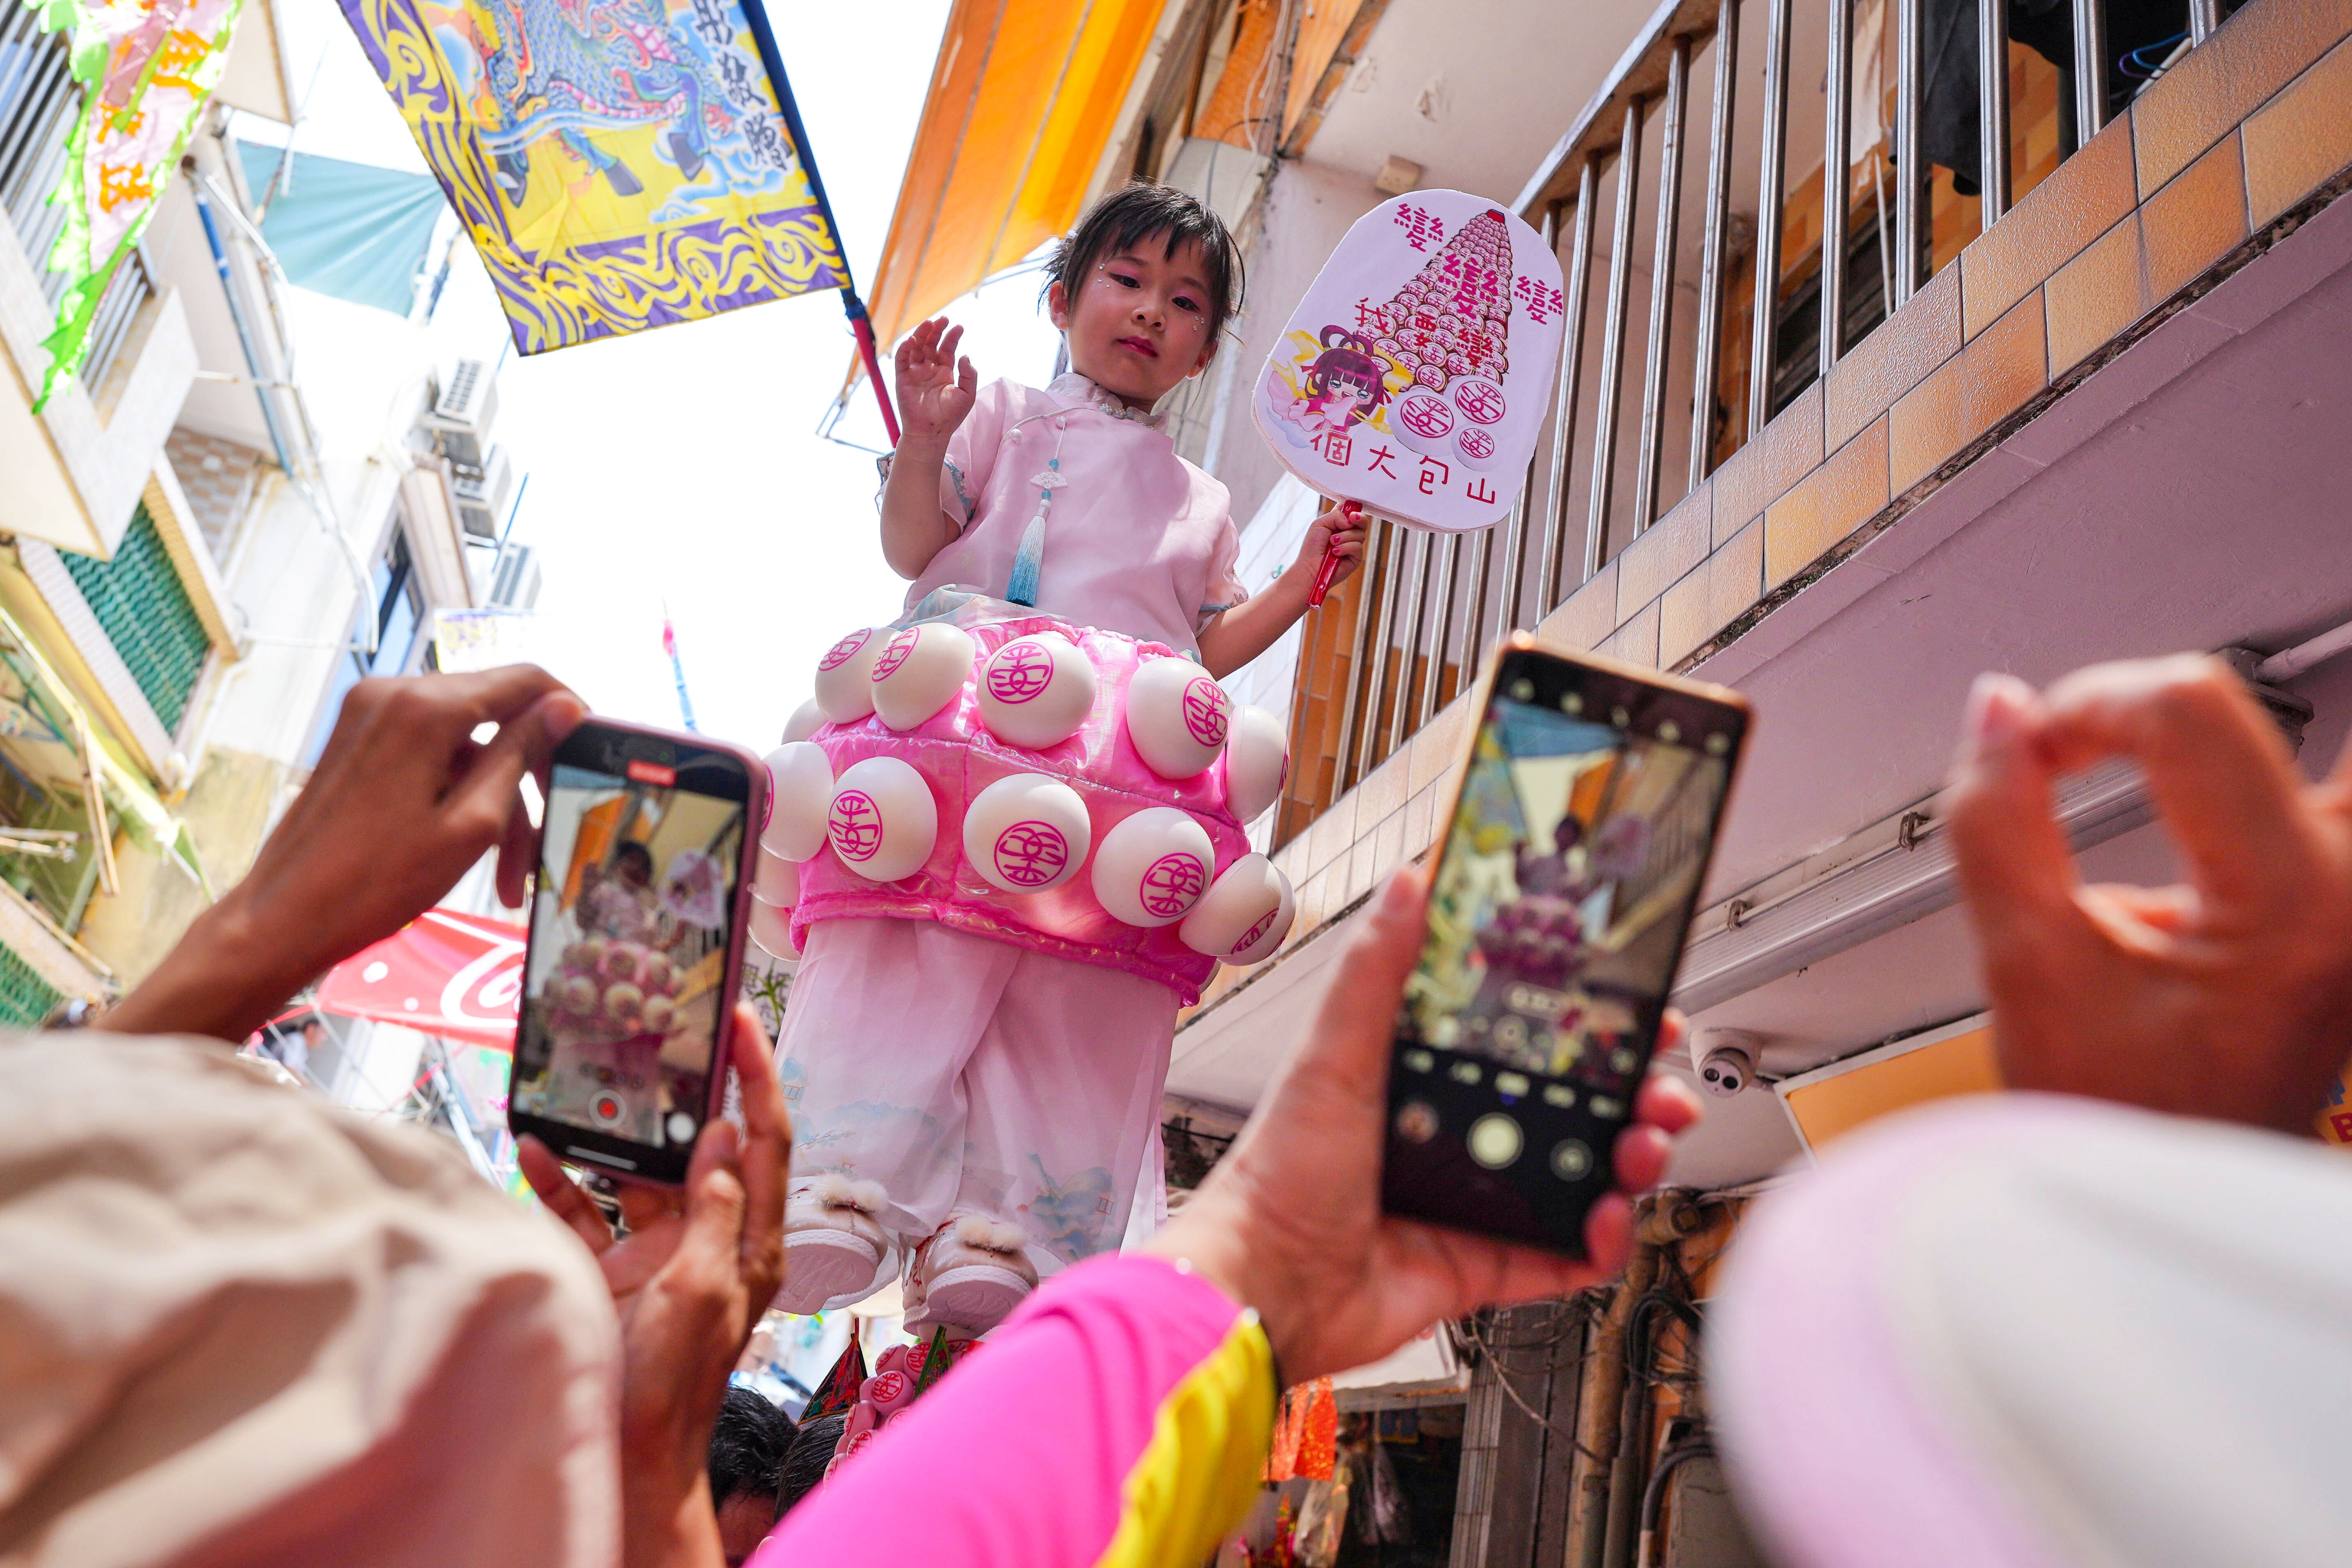 The parade featuring young children in costumes is a highlight of the festival. Photo: Elson Li